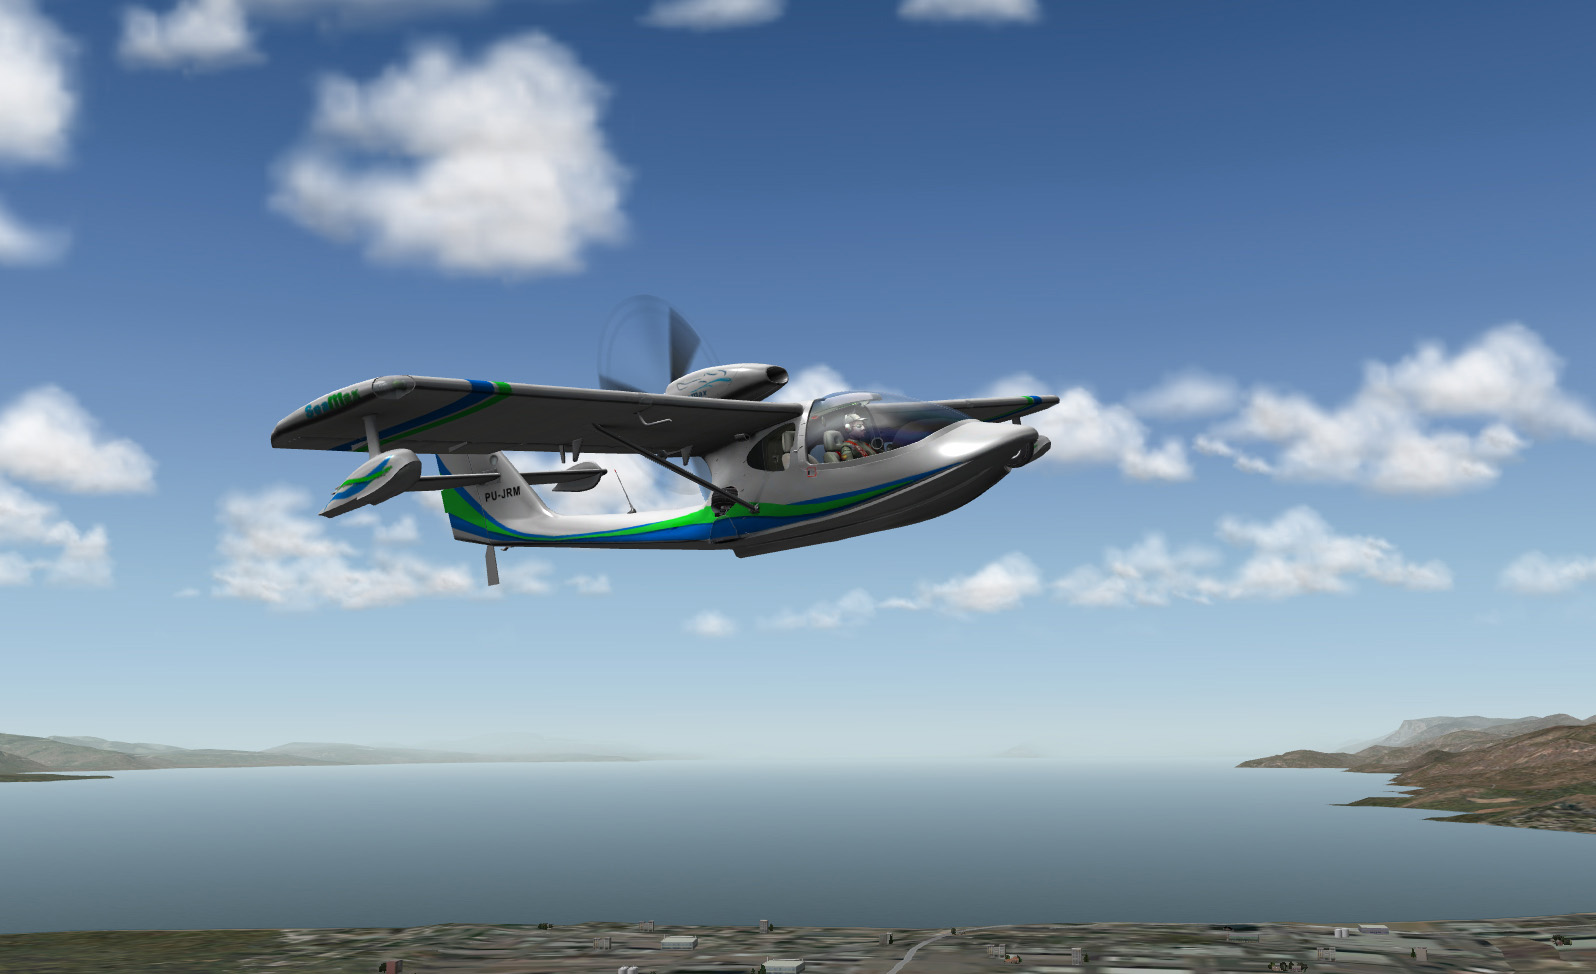 X-Plane - Seamax Airplane Over Water, side view